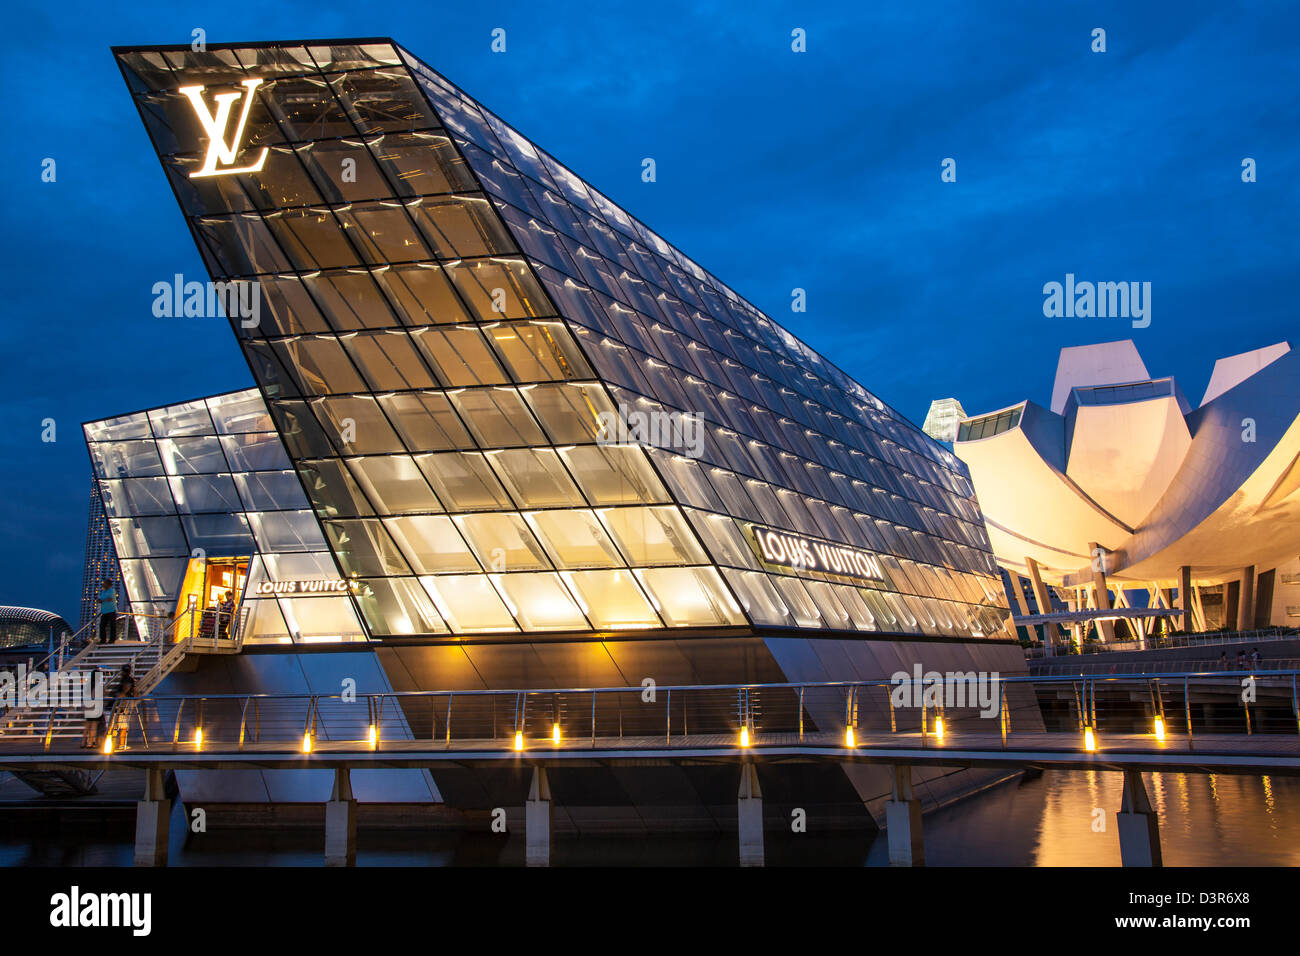 Louis Vuitton Island Maison in Marina Bay, Singapore, and accessible by a  pedestrian bridge or underground from The Shoppes at Marina Bay Sands Stock  Photo - Alamy